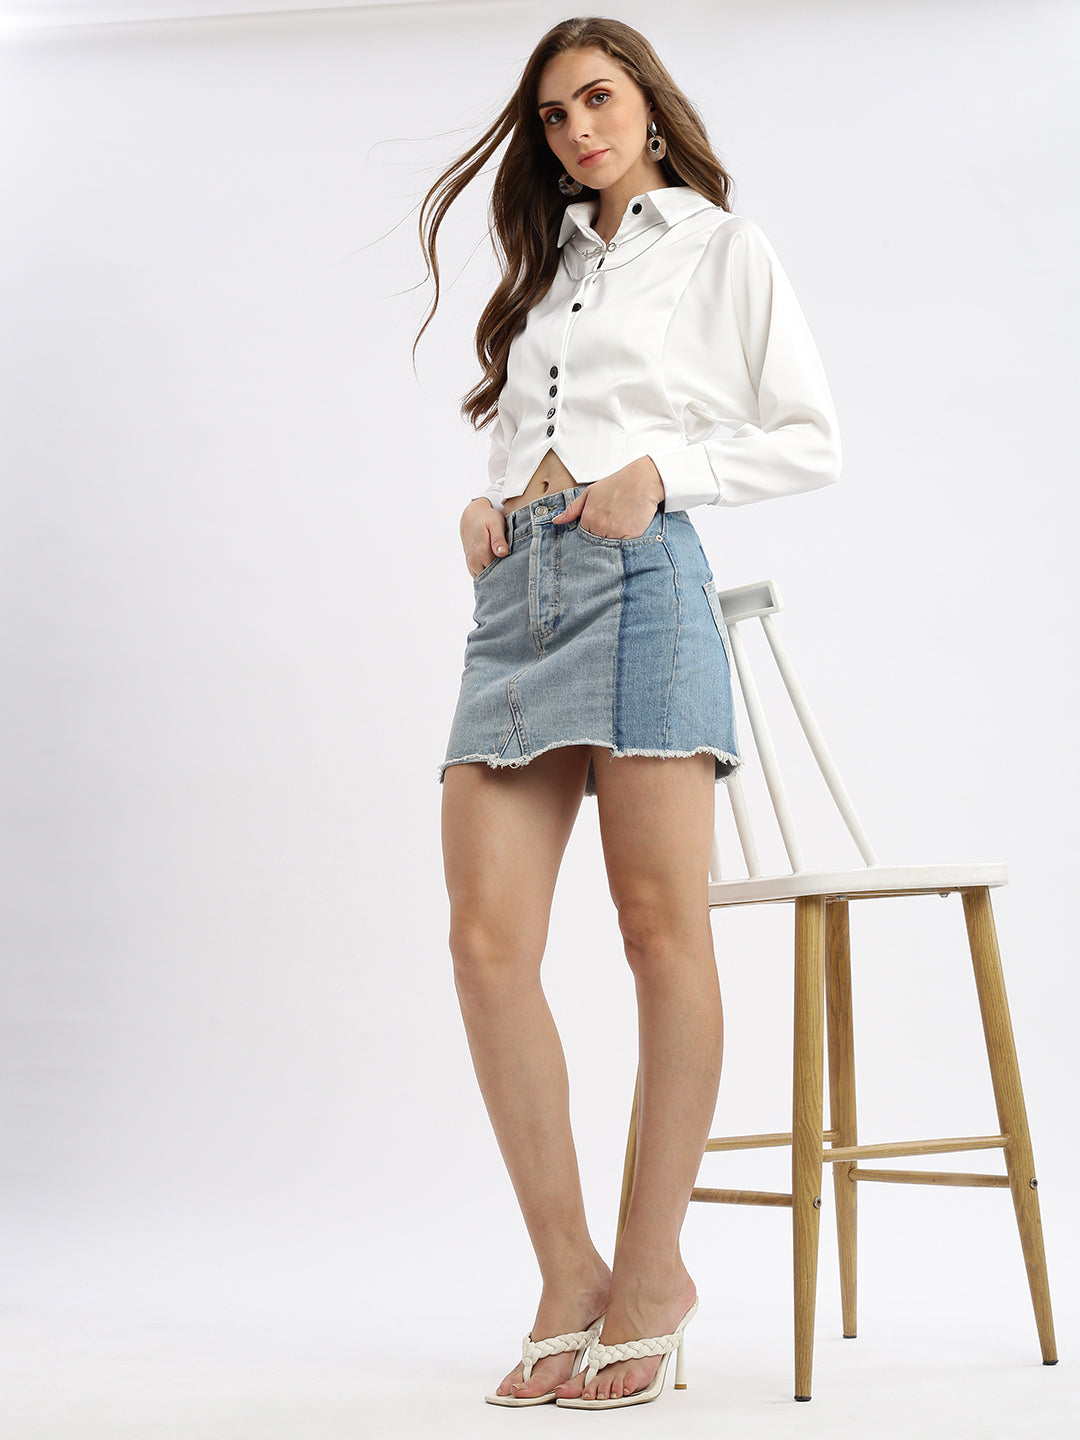 Women Solid White Shirt Style Smocked Top with Neck Chain